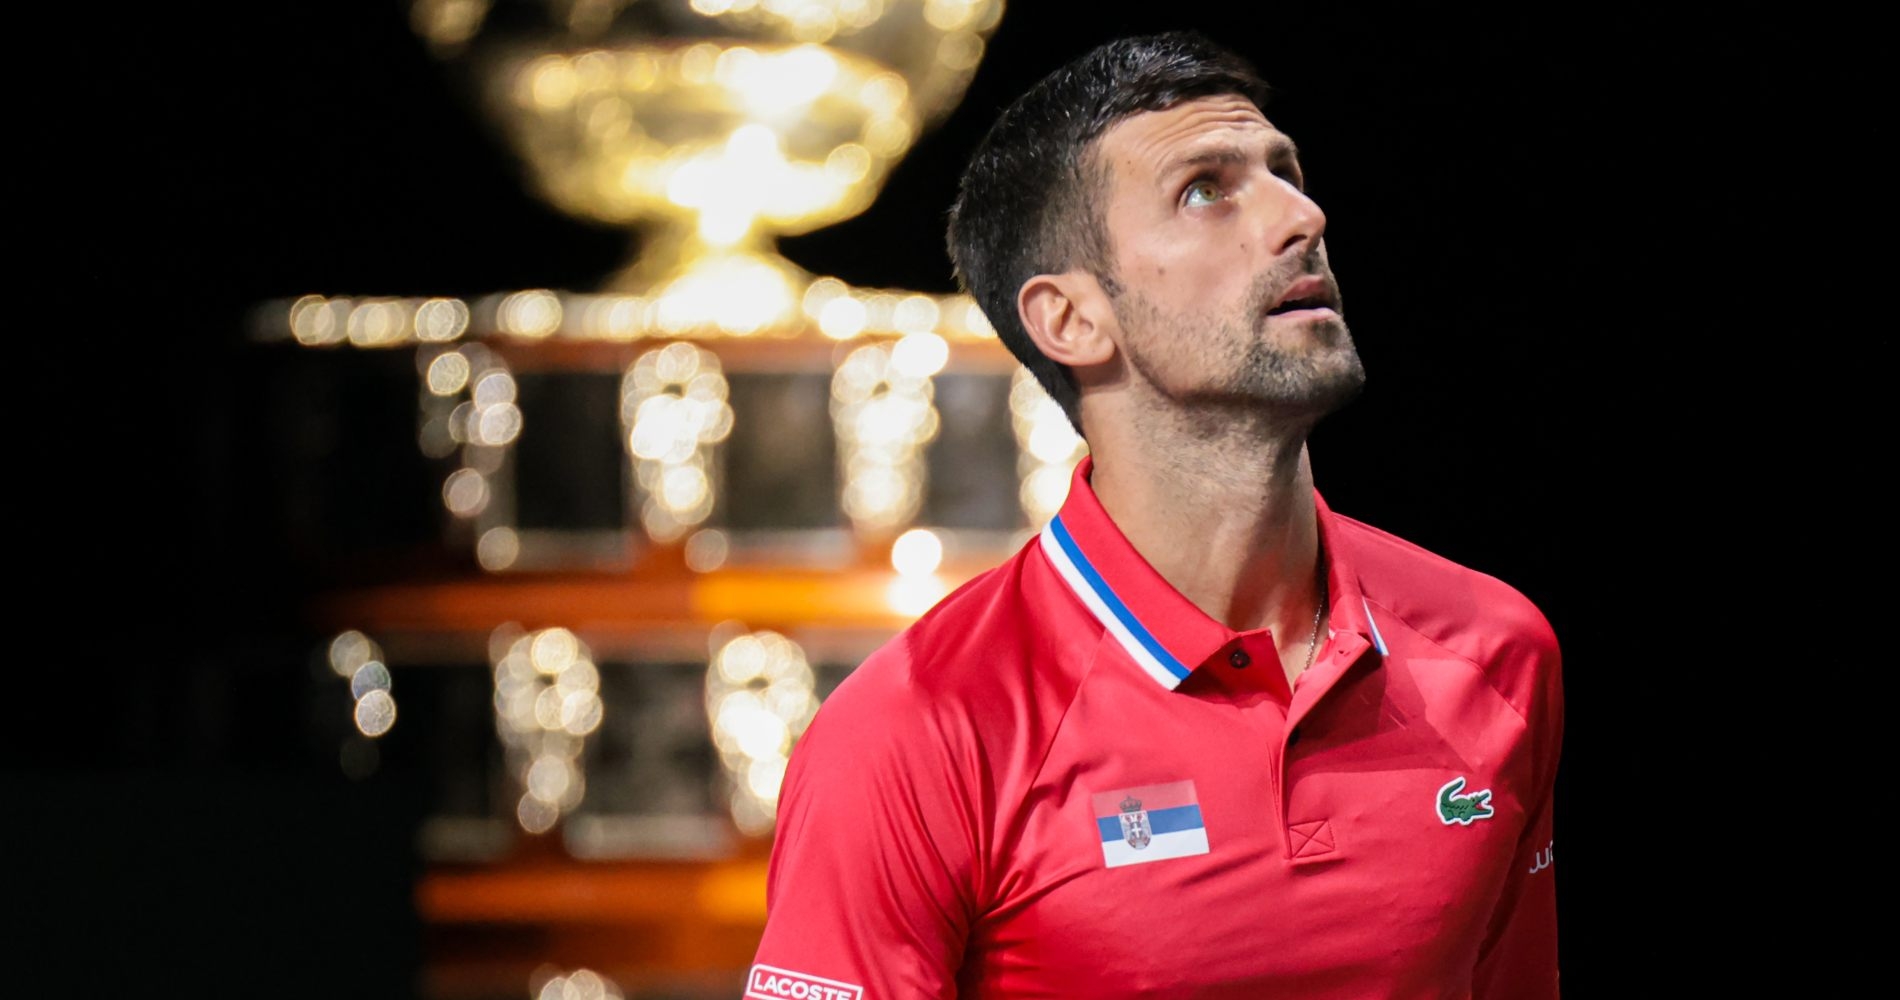 I have my pre-match routines” - Djokovic refused a doping test before Davis  Cup quarter-finals, explains why - Tennis Majors